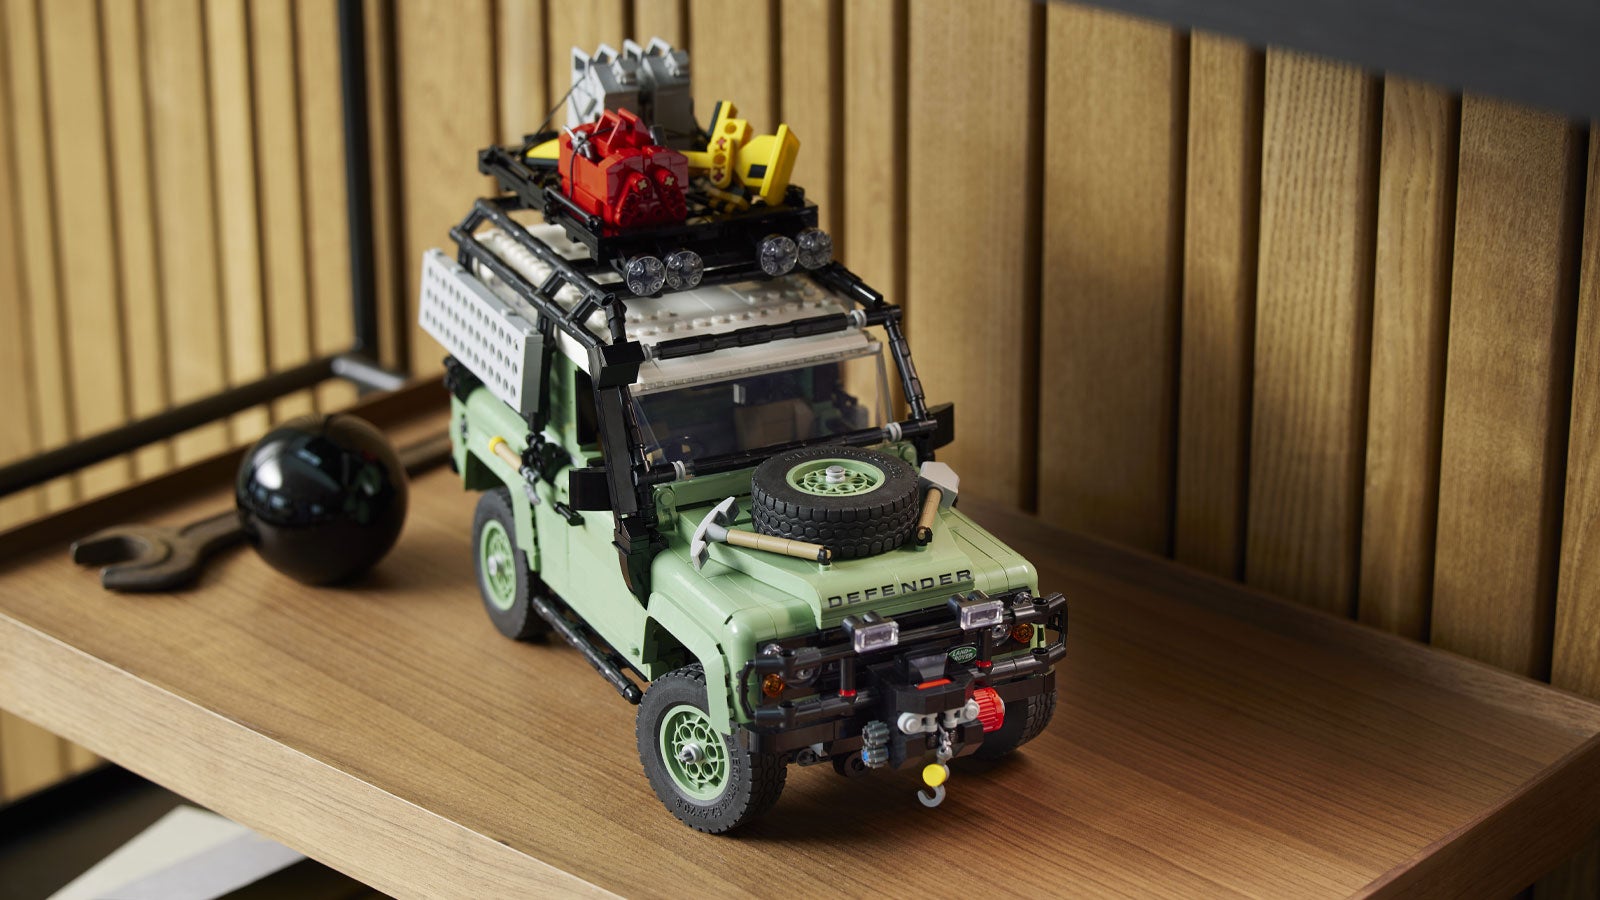 Here’s How LEGO Captures the Essence of a Real Car in its Toys